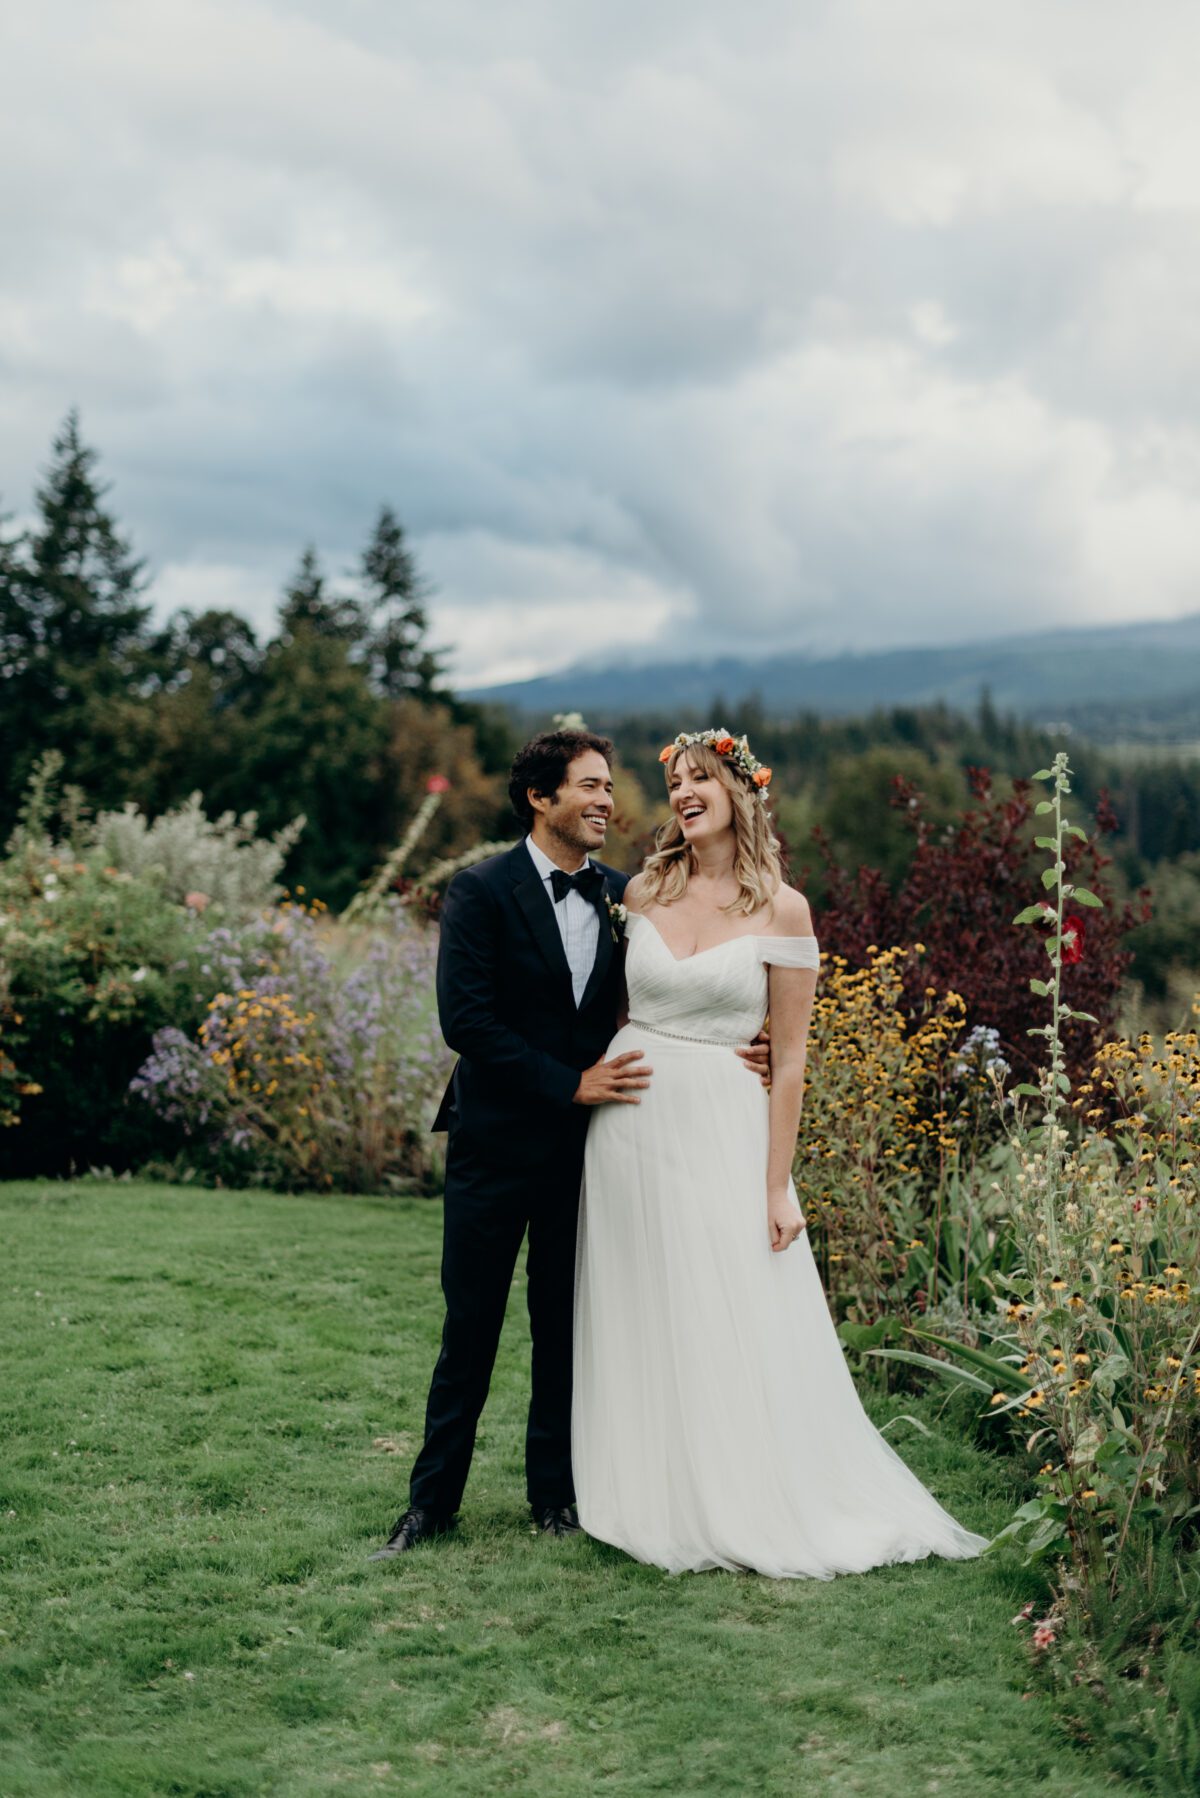 Laughing with joy, a bride and groom stand together beside a flower garden at Mt Hood Organic Farms